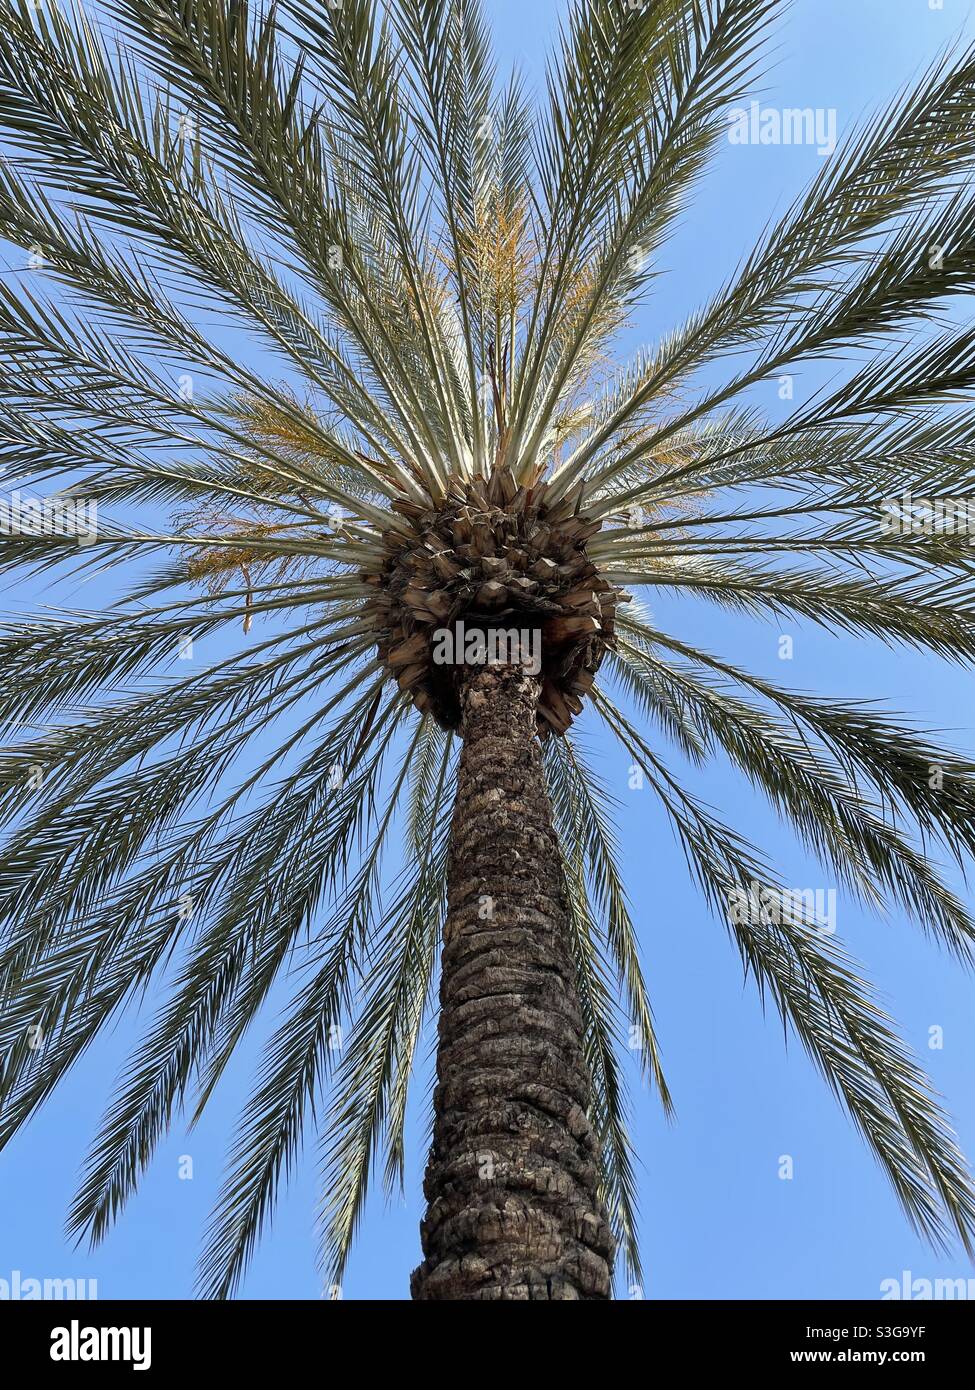 Perspective view looking up at a large palm tree with blue sky background Stock Photo